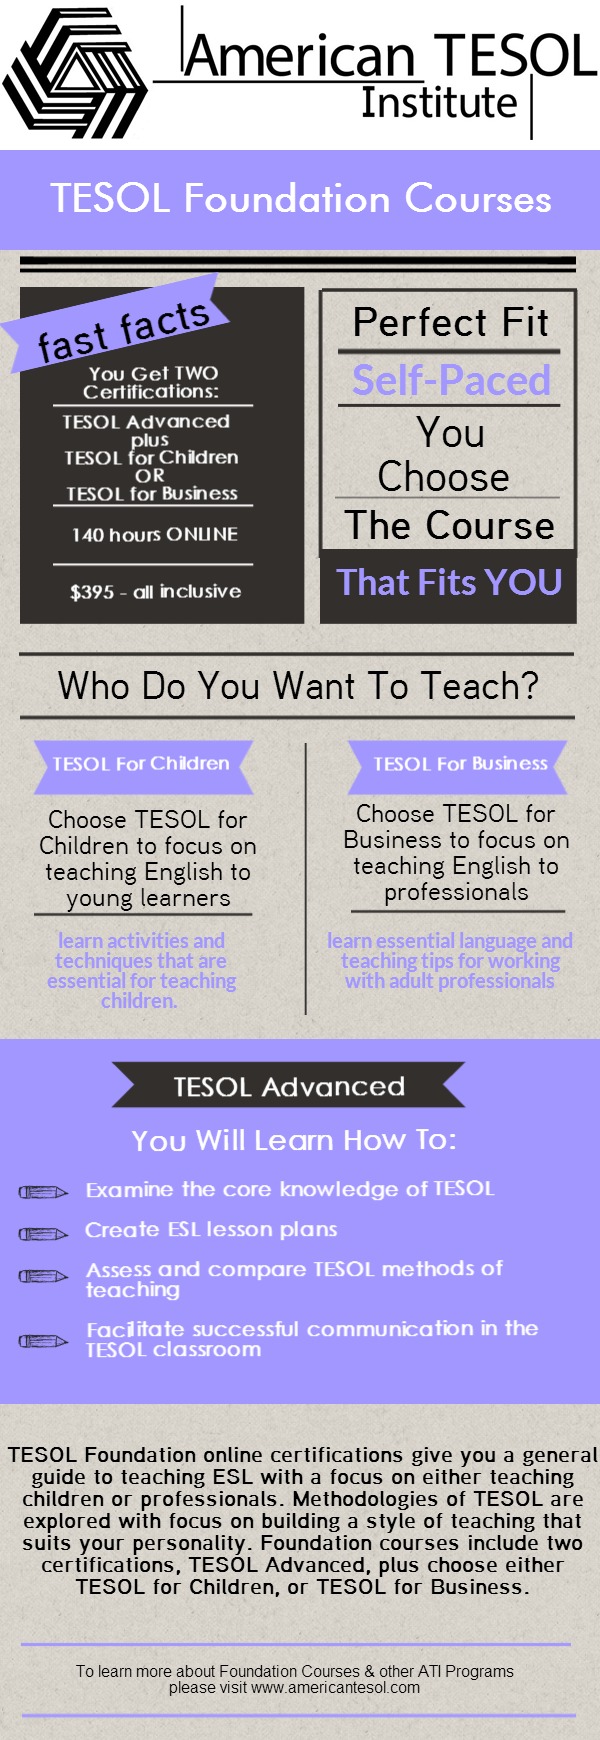 Become a TESOL Teacher - American TESOL Foundation Certifications